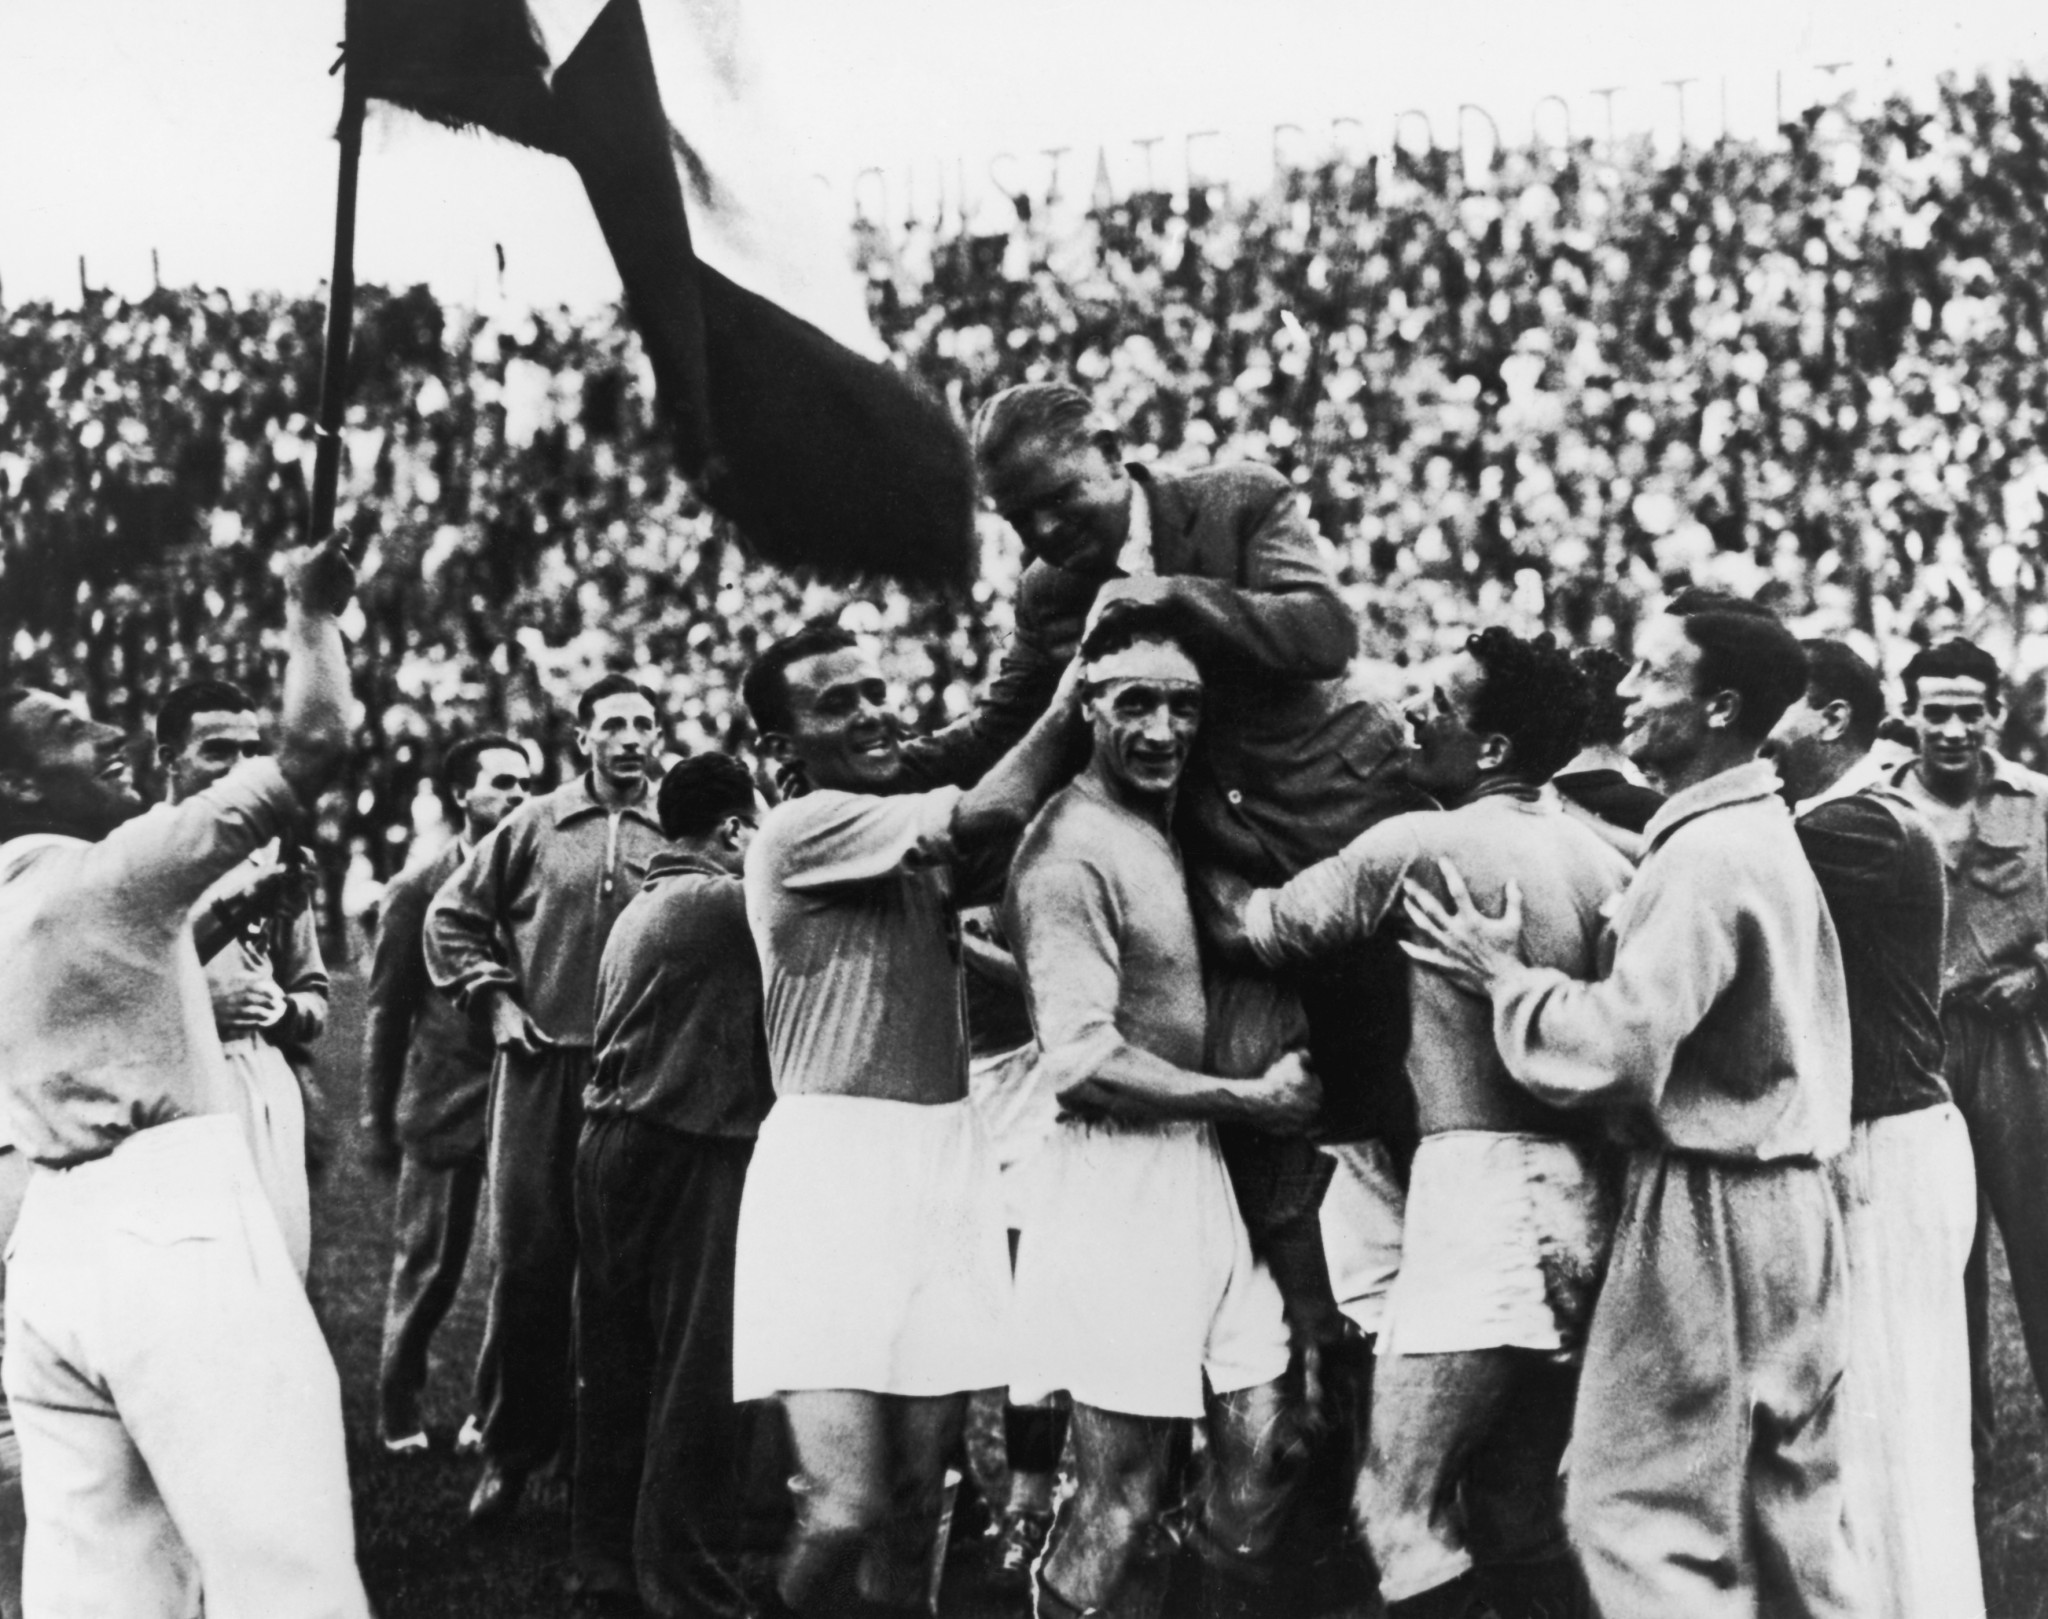 Italy won the FIFA World Cup in 1934 under the gaze of Fascist dictator Benito Mussolini ©Getty Images